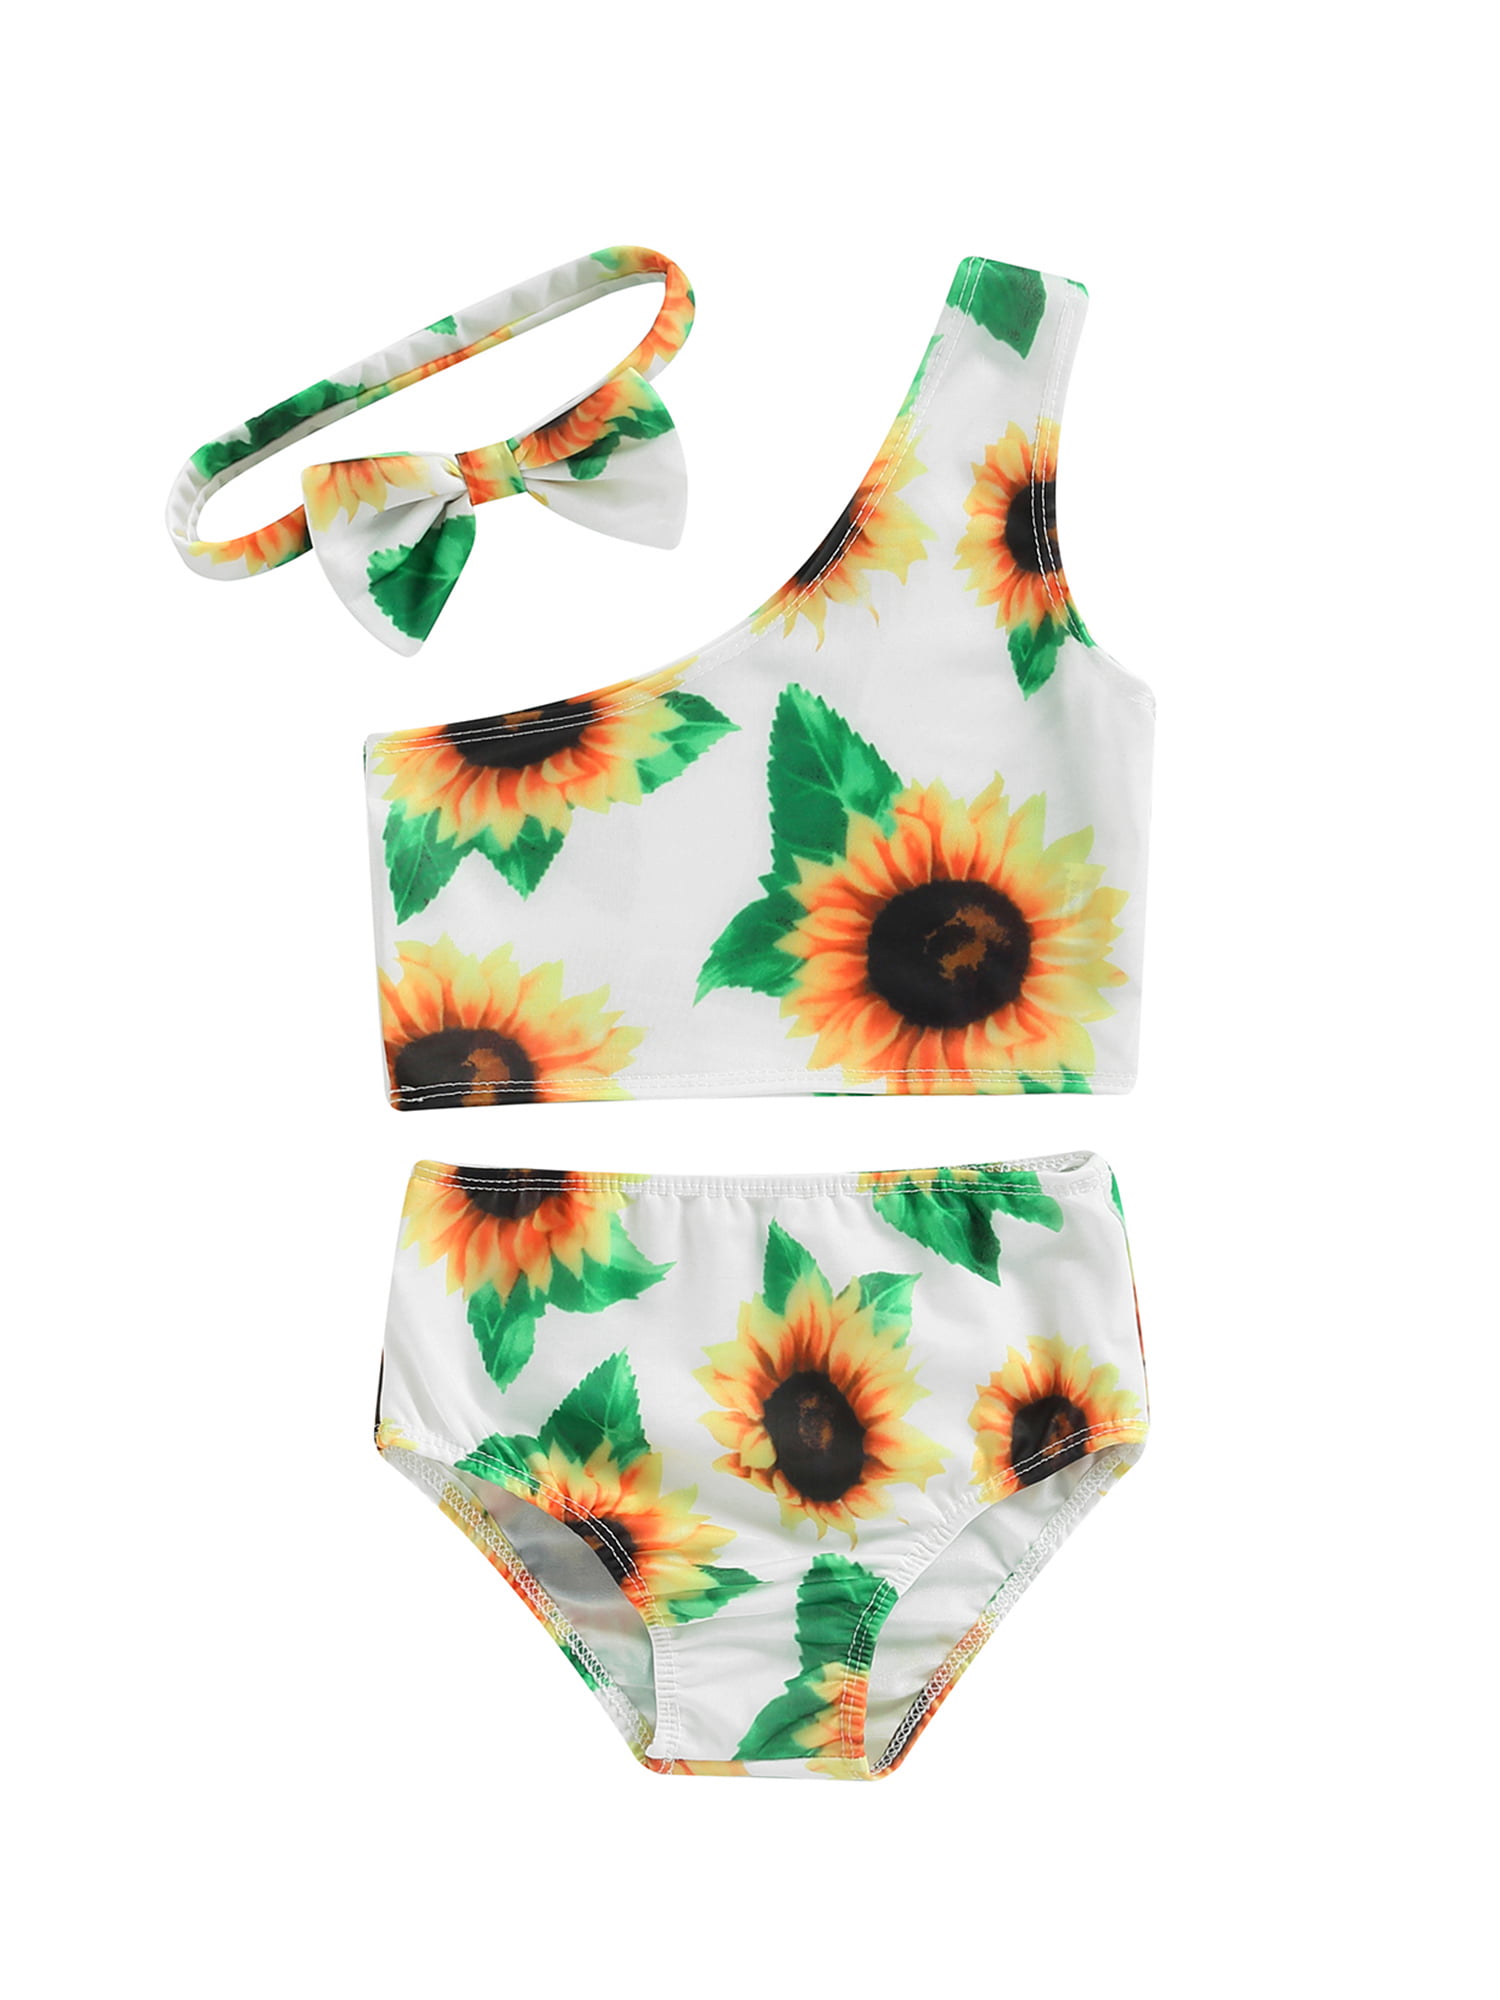 Infant Toddler Baby Girls Bikini Swimsuit Set Sunflower/Green Leaves Two Piece Bathing Suit Halter Top Summer Suit 